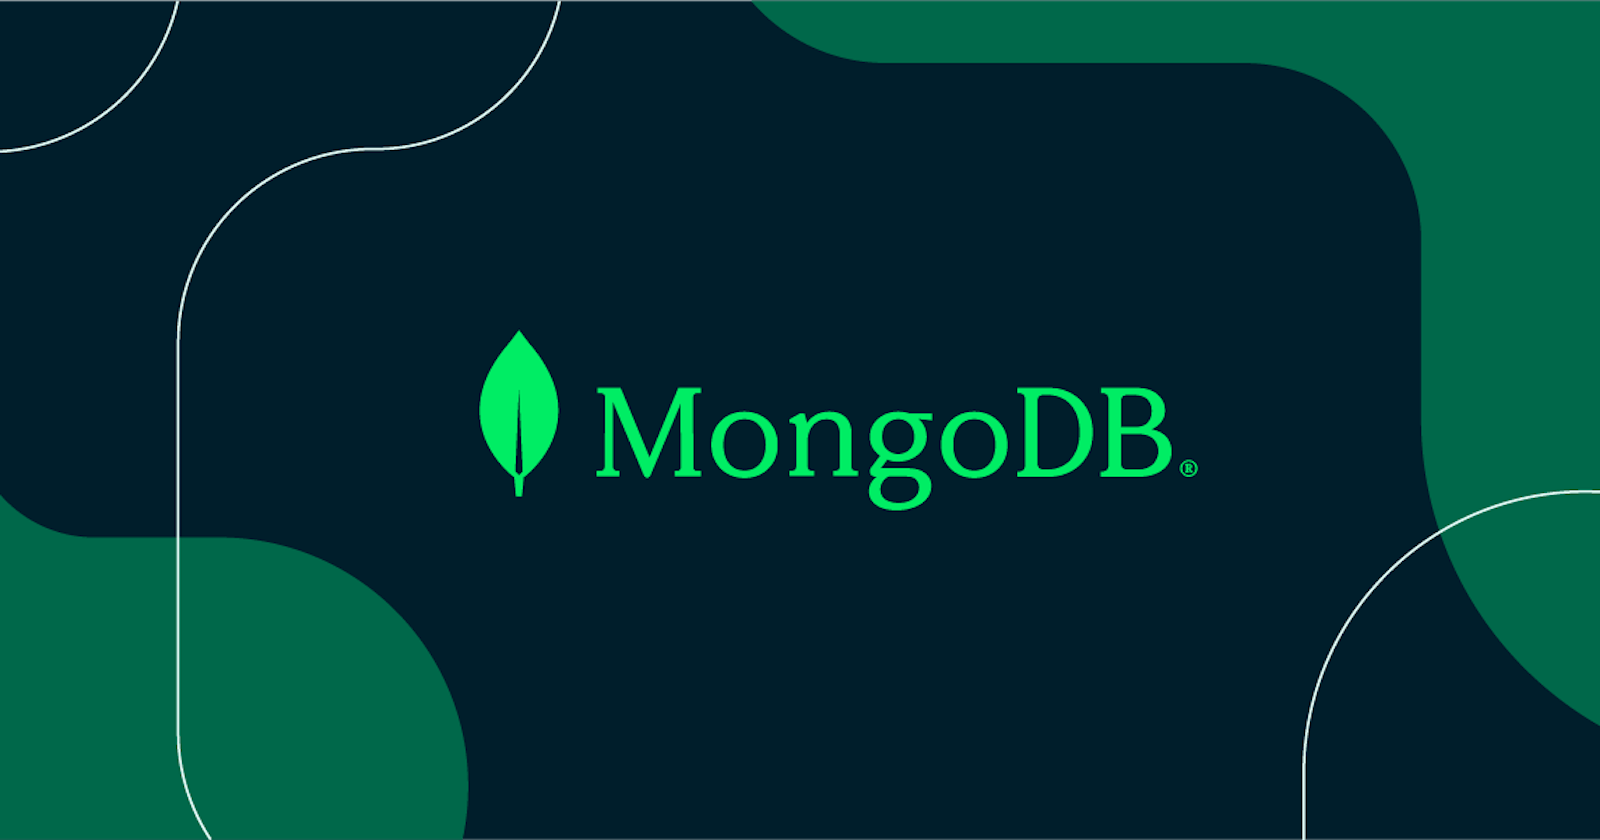 MongoDB and its features